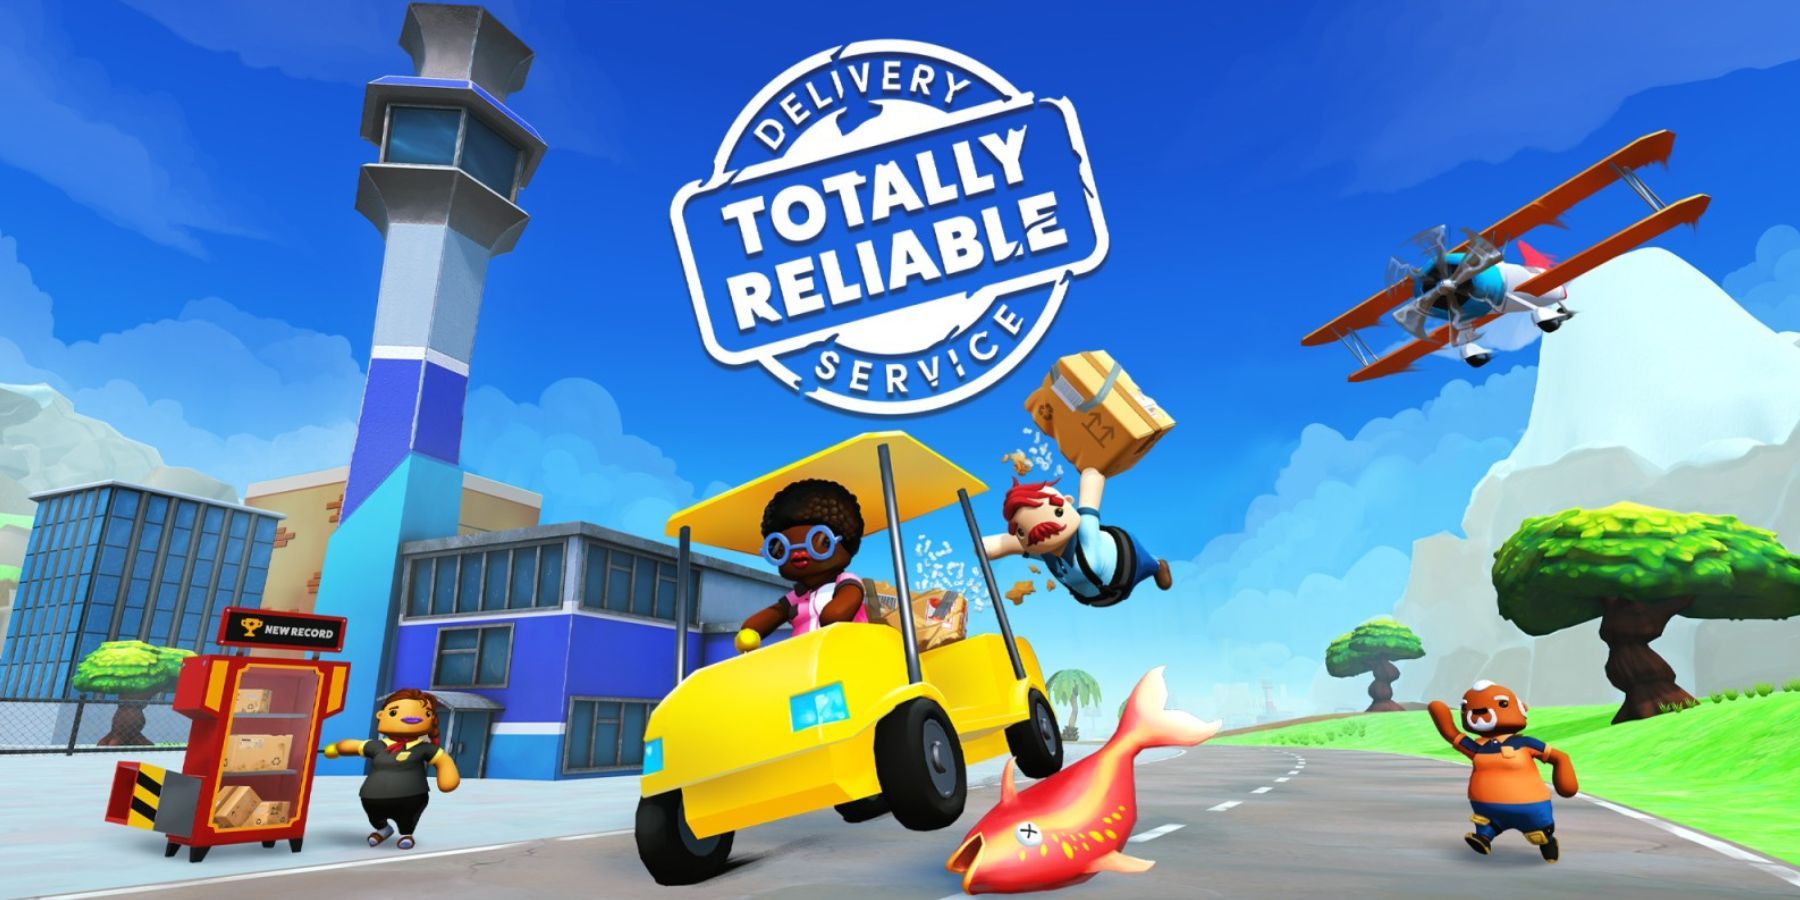 totally reliable delivery service cover art.